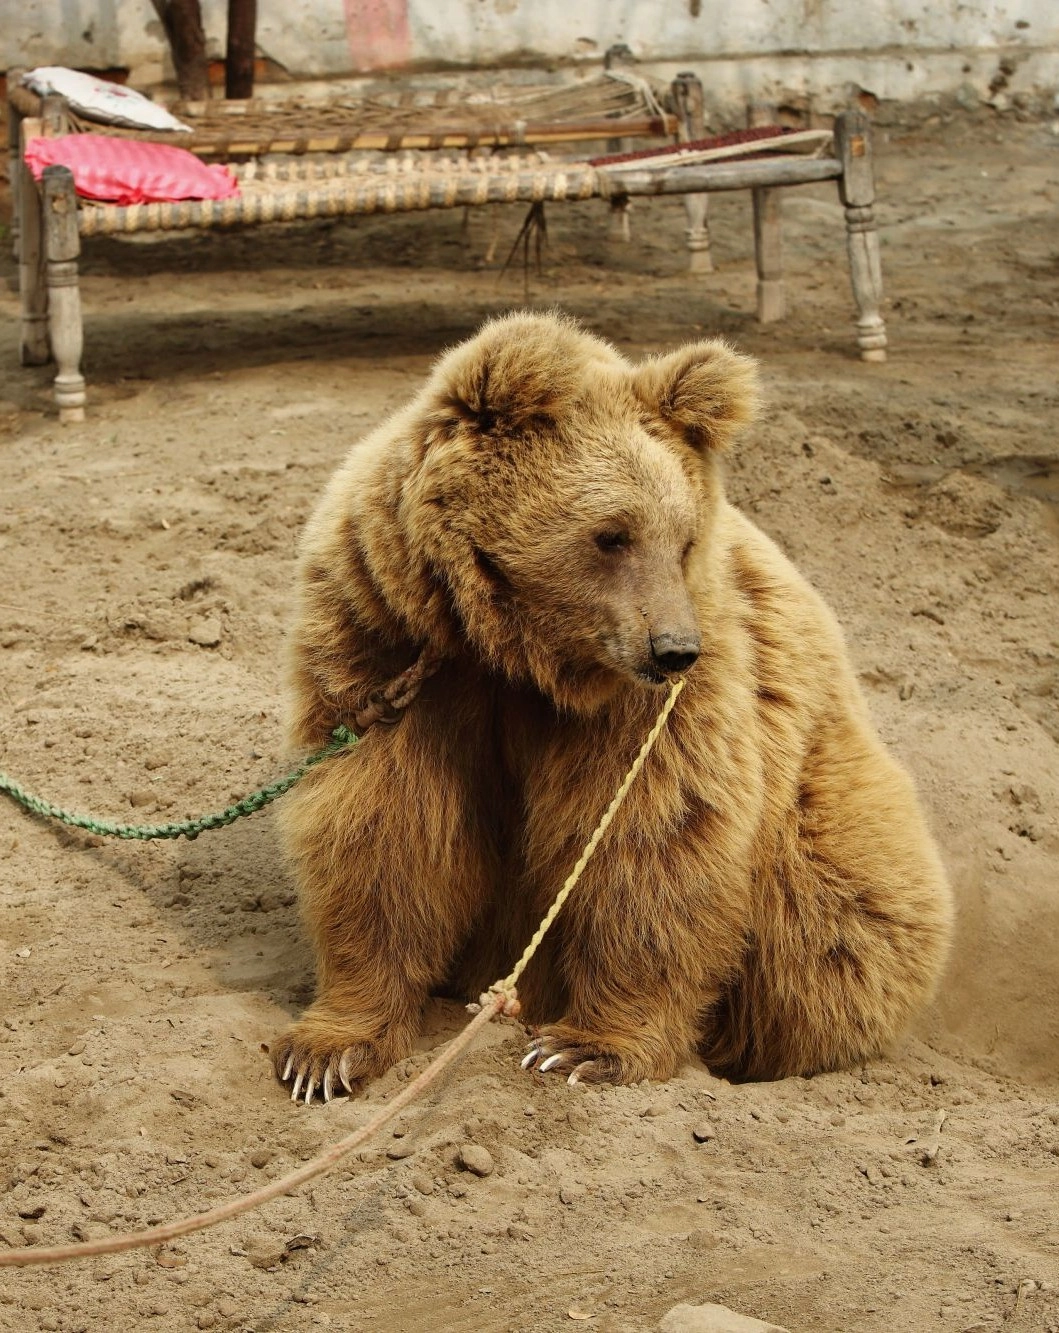 Pictured: Kainat the bear was used for bear baiting before her rescue.